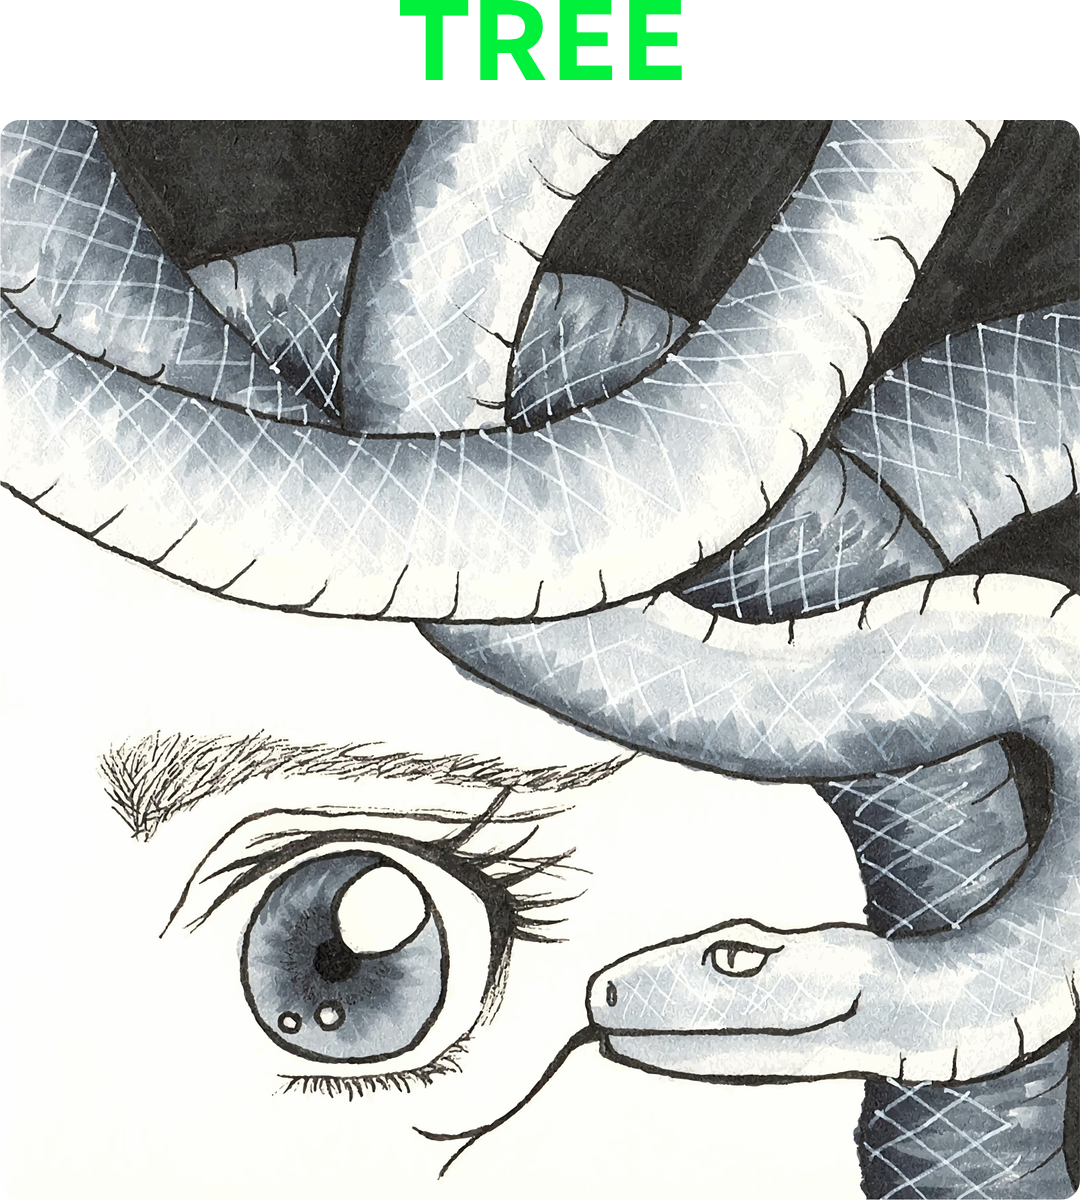 Ink illustration: close up of a female head with a snake wrapped around it. The focus is on the eye and the snake’s head, which is very close to the eye. The snake looks pleased with itself.